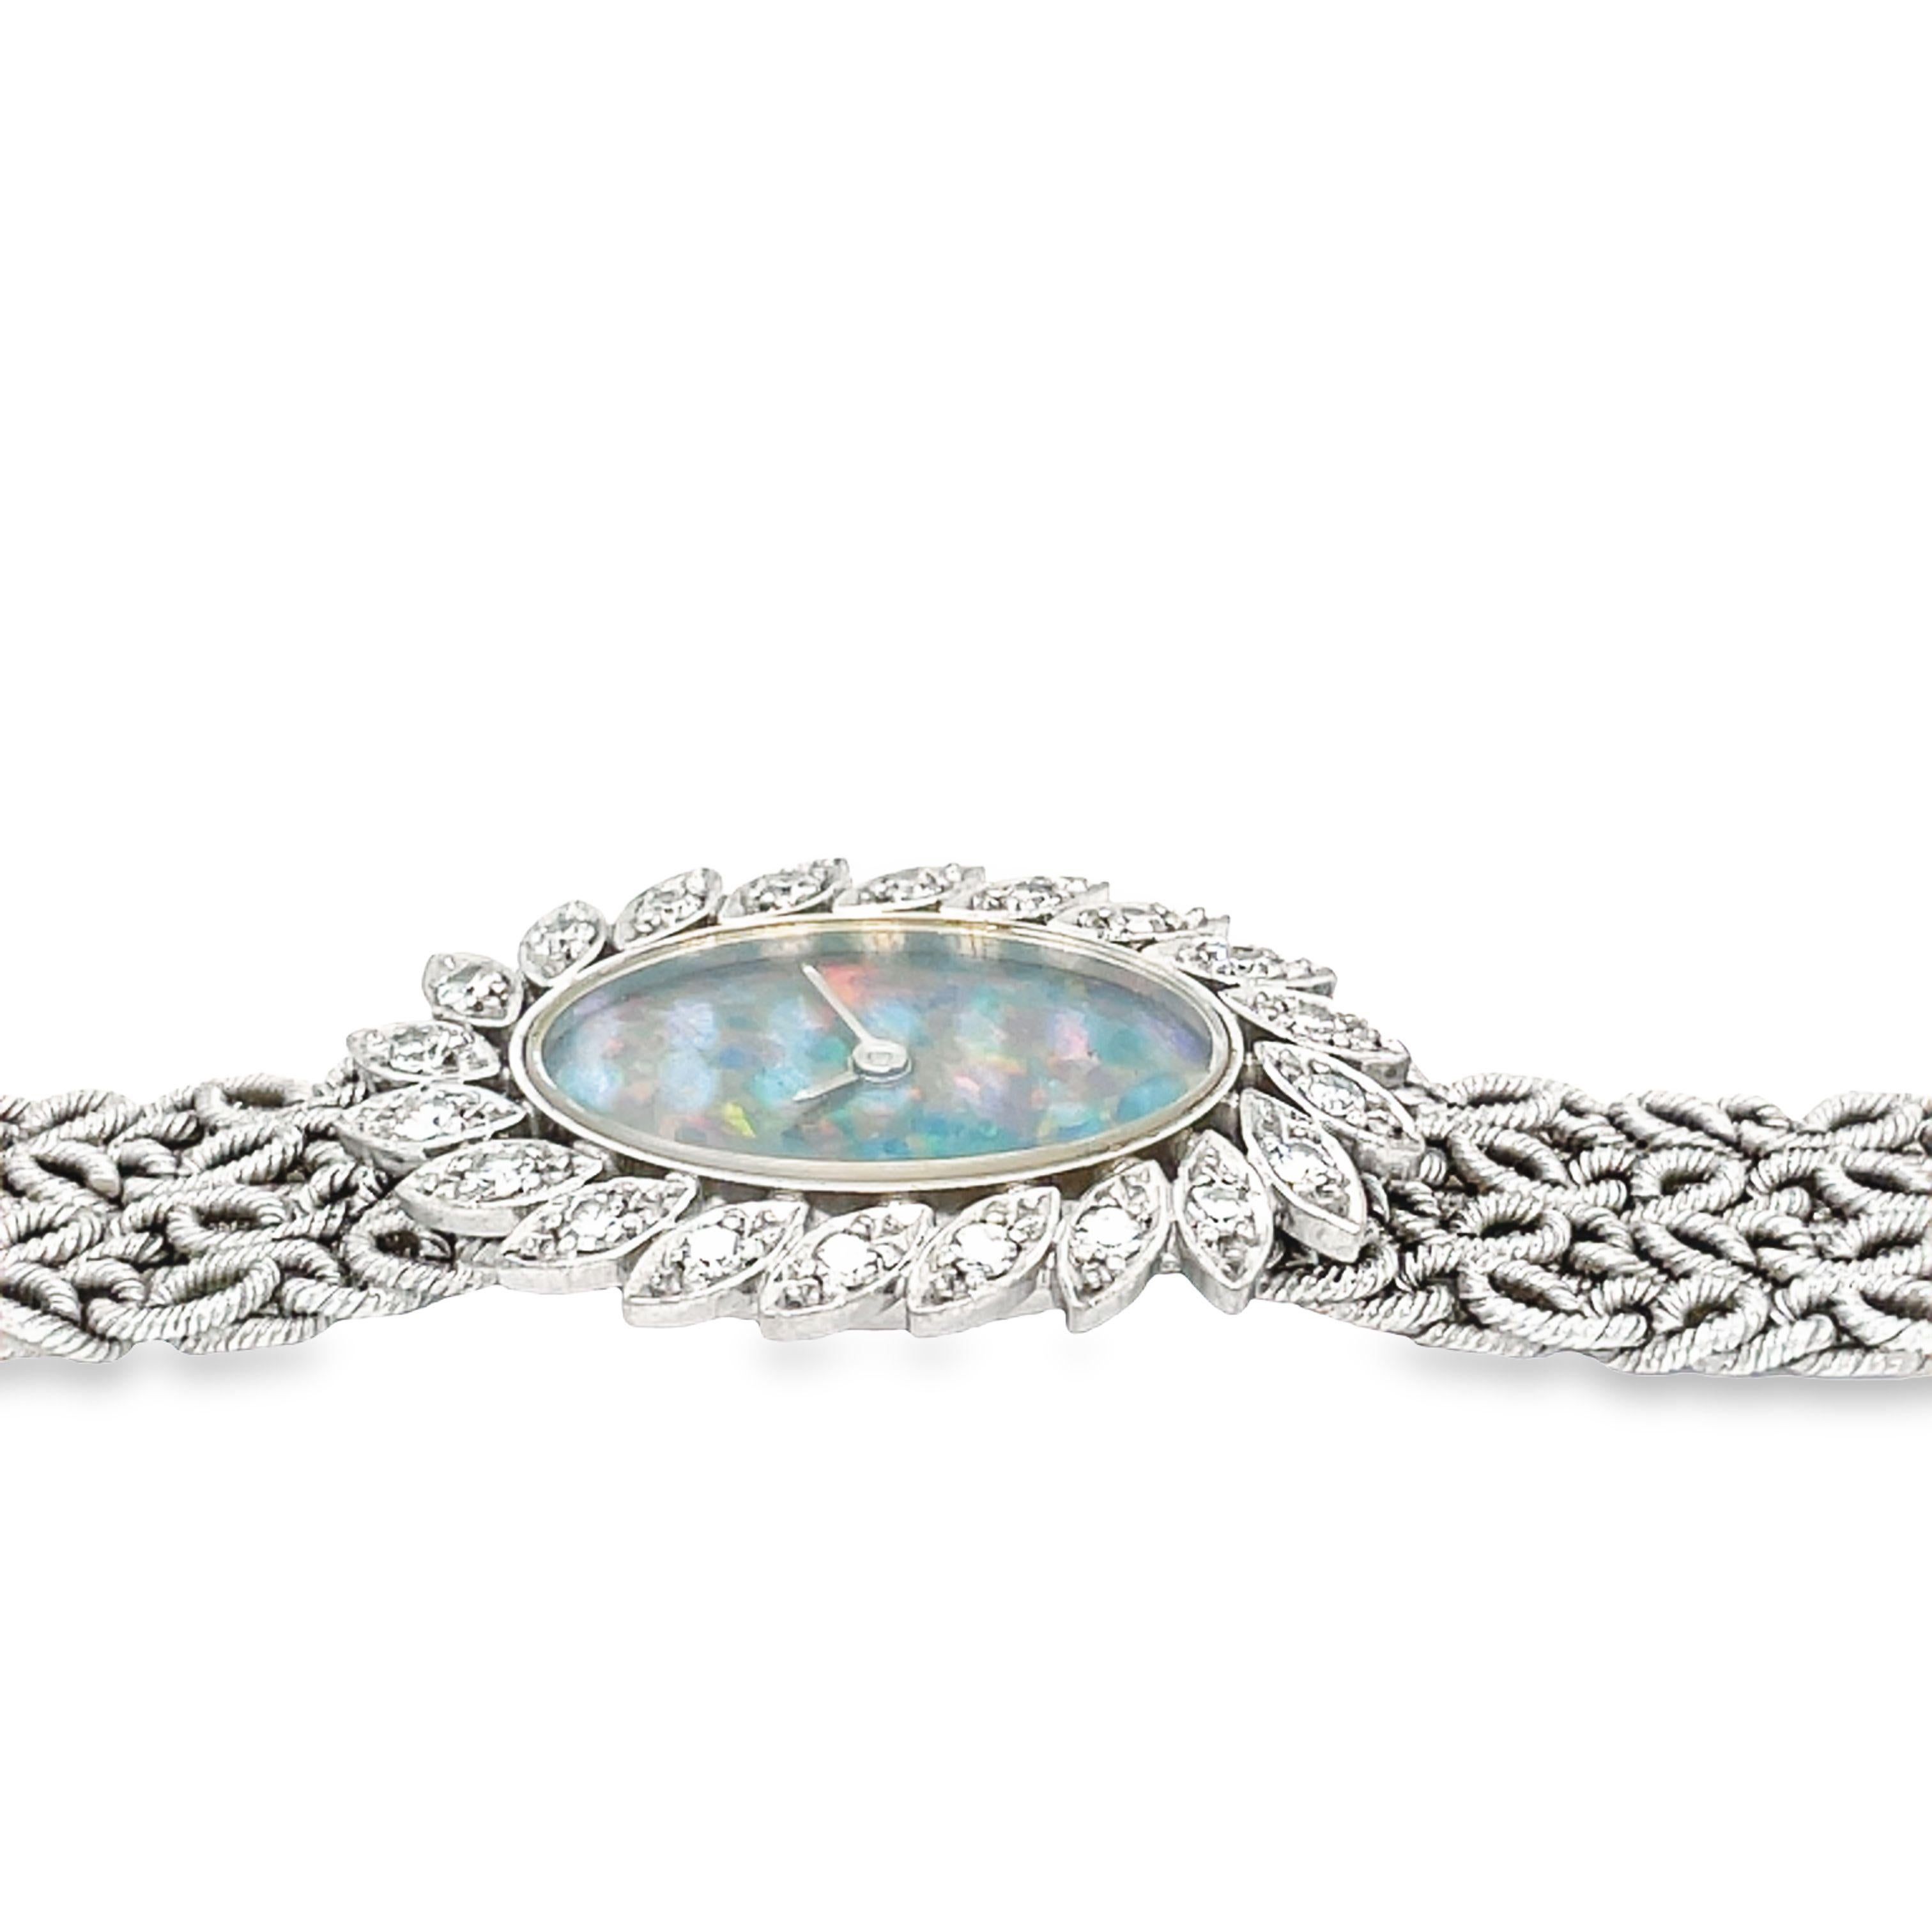 Chopard 18k White Gold Opal and Diamond Lady’s Watch For Sale 4